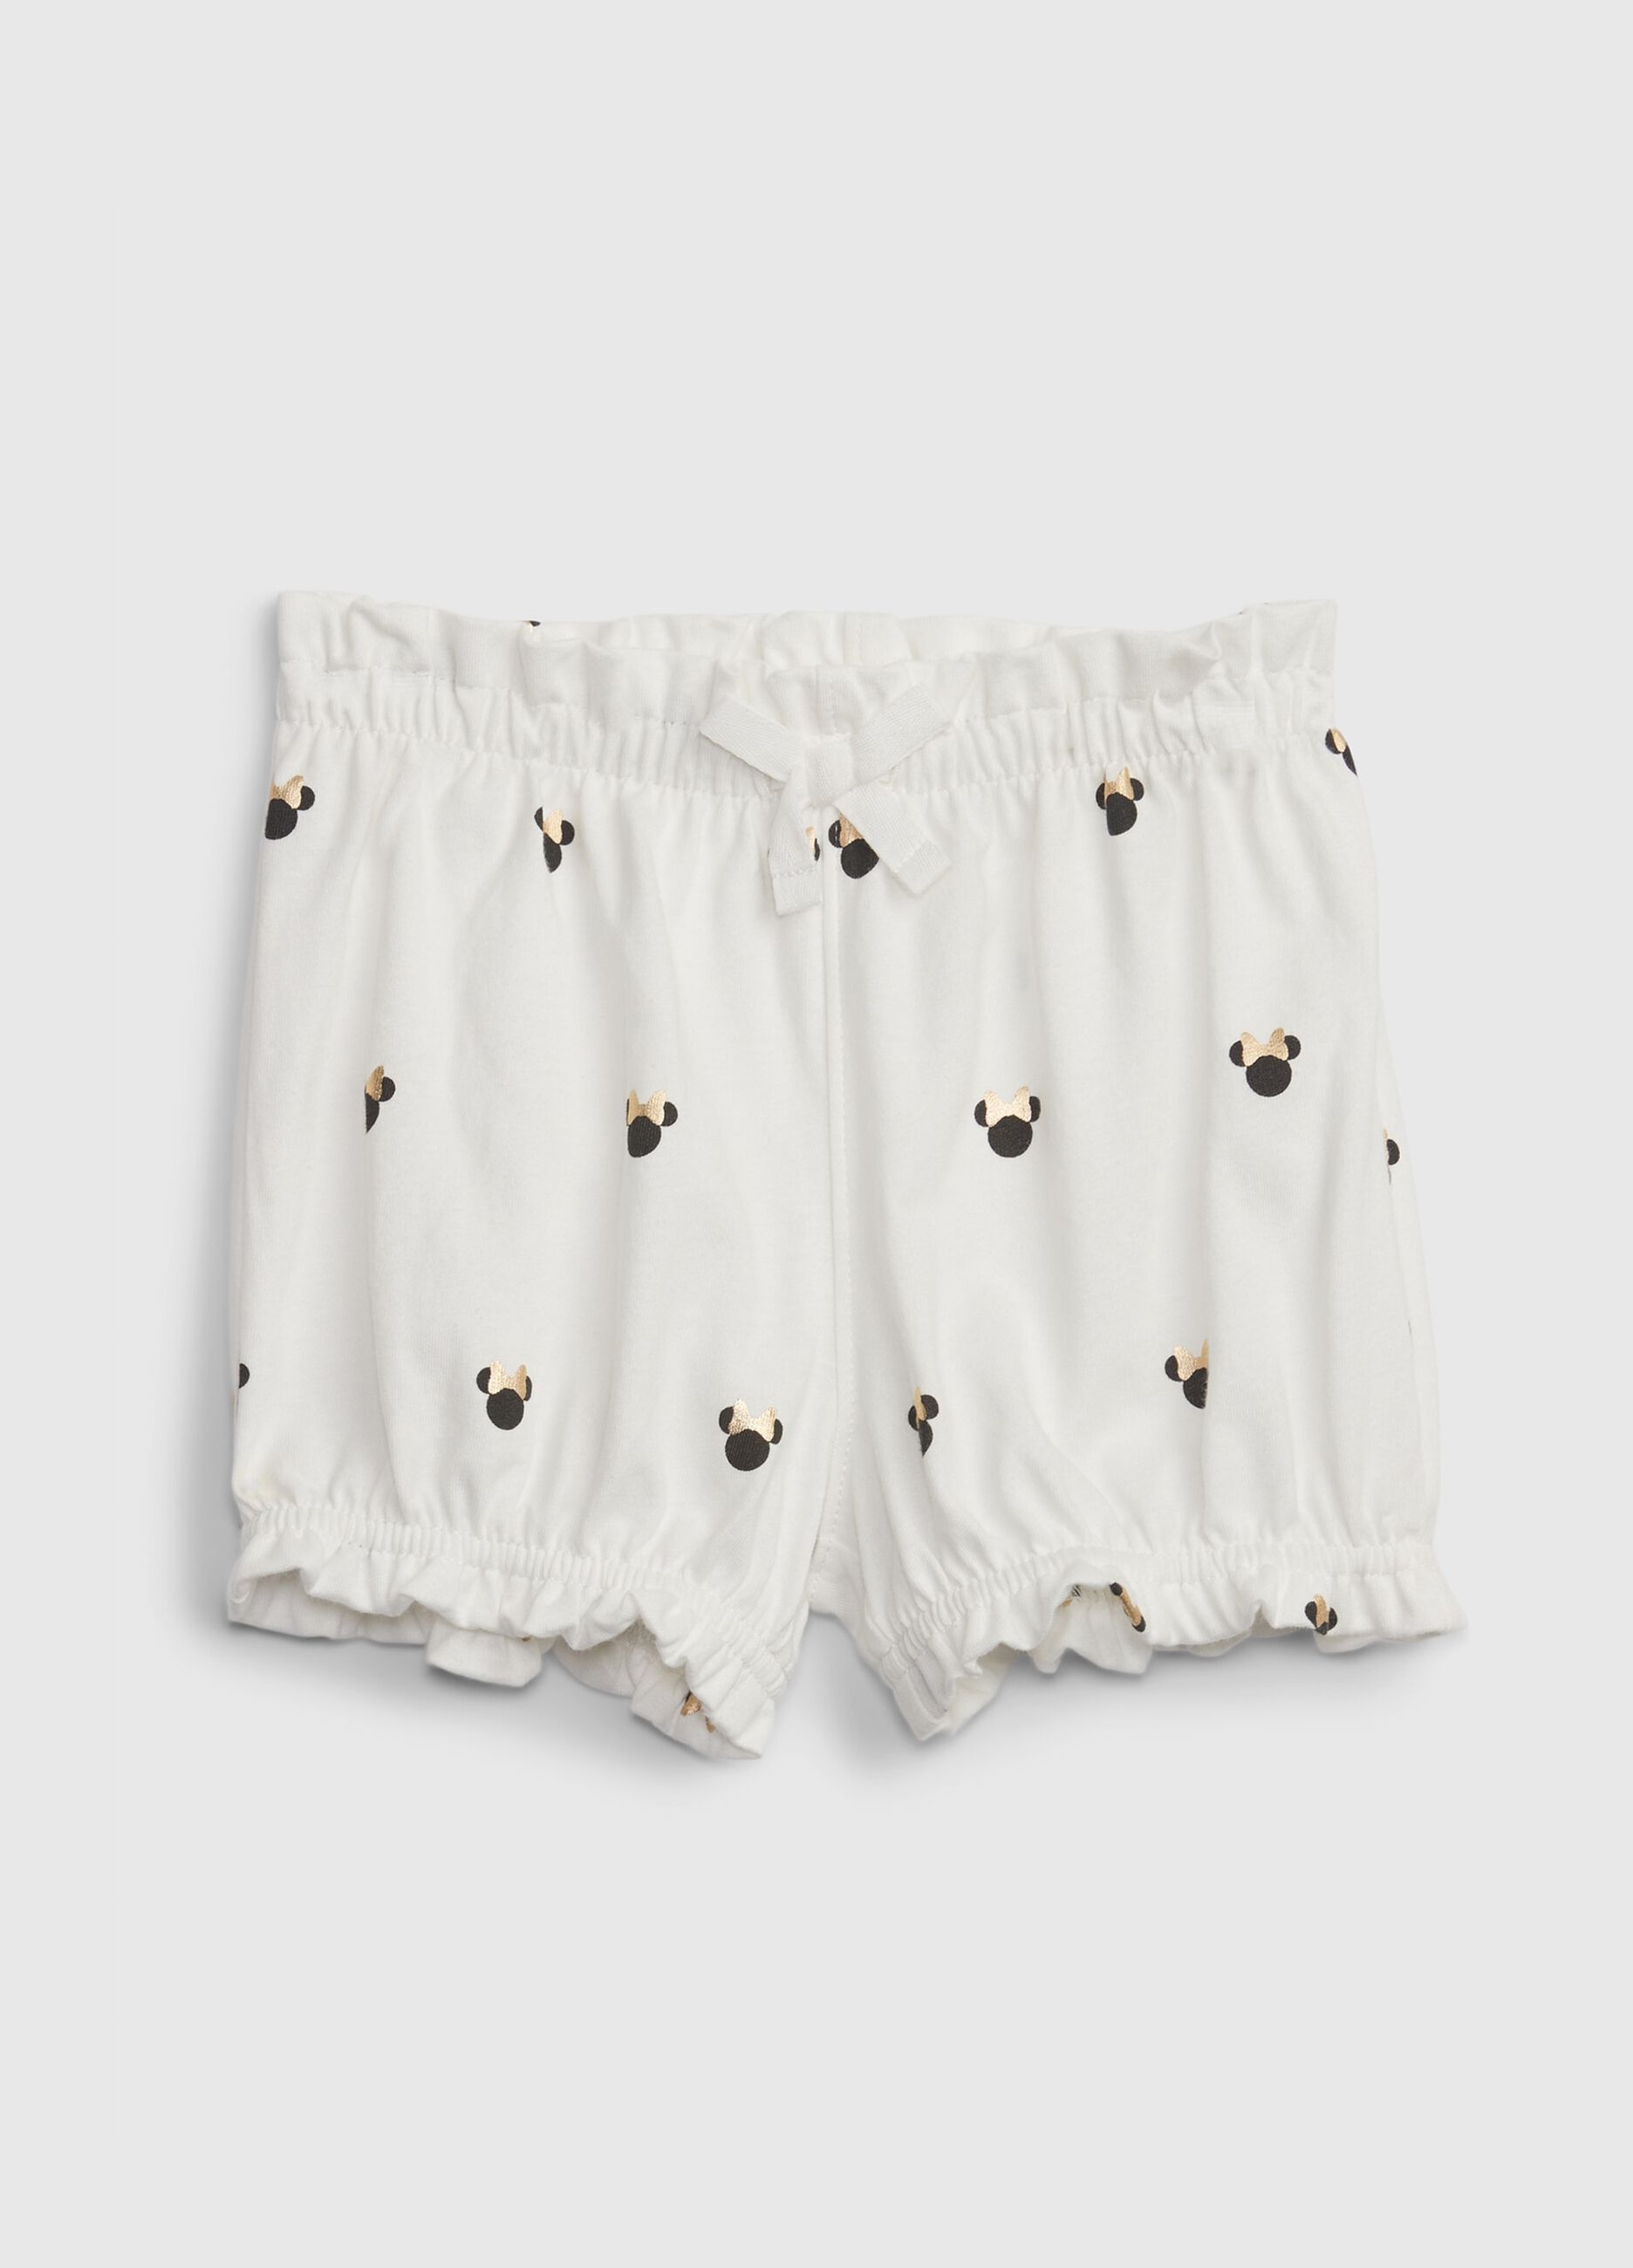 Organic cotton shorts with print and embroidery